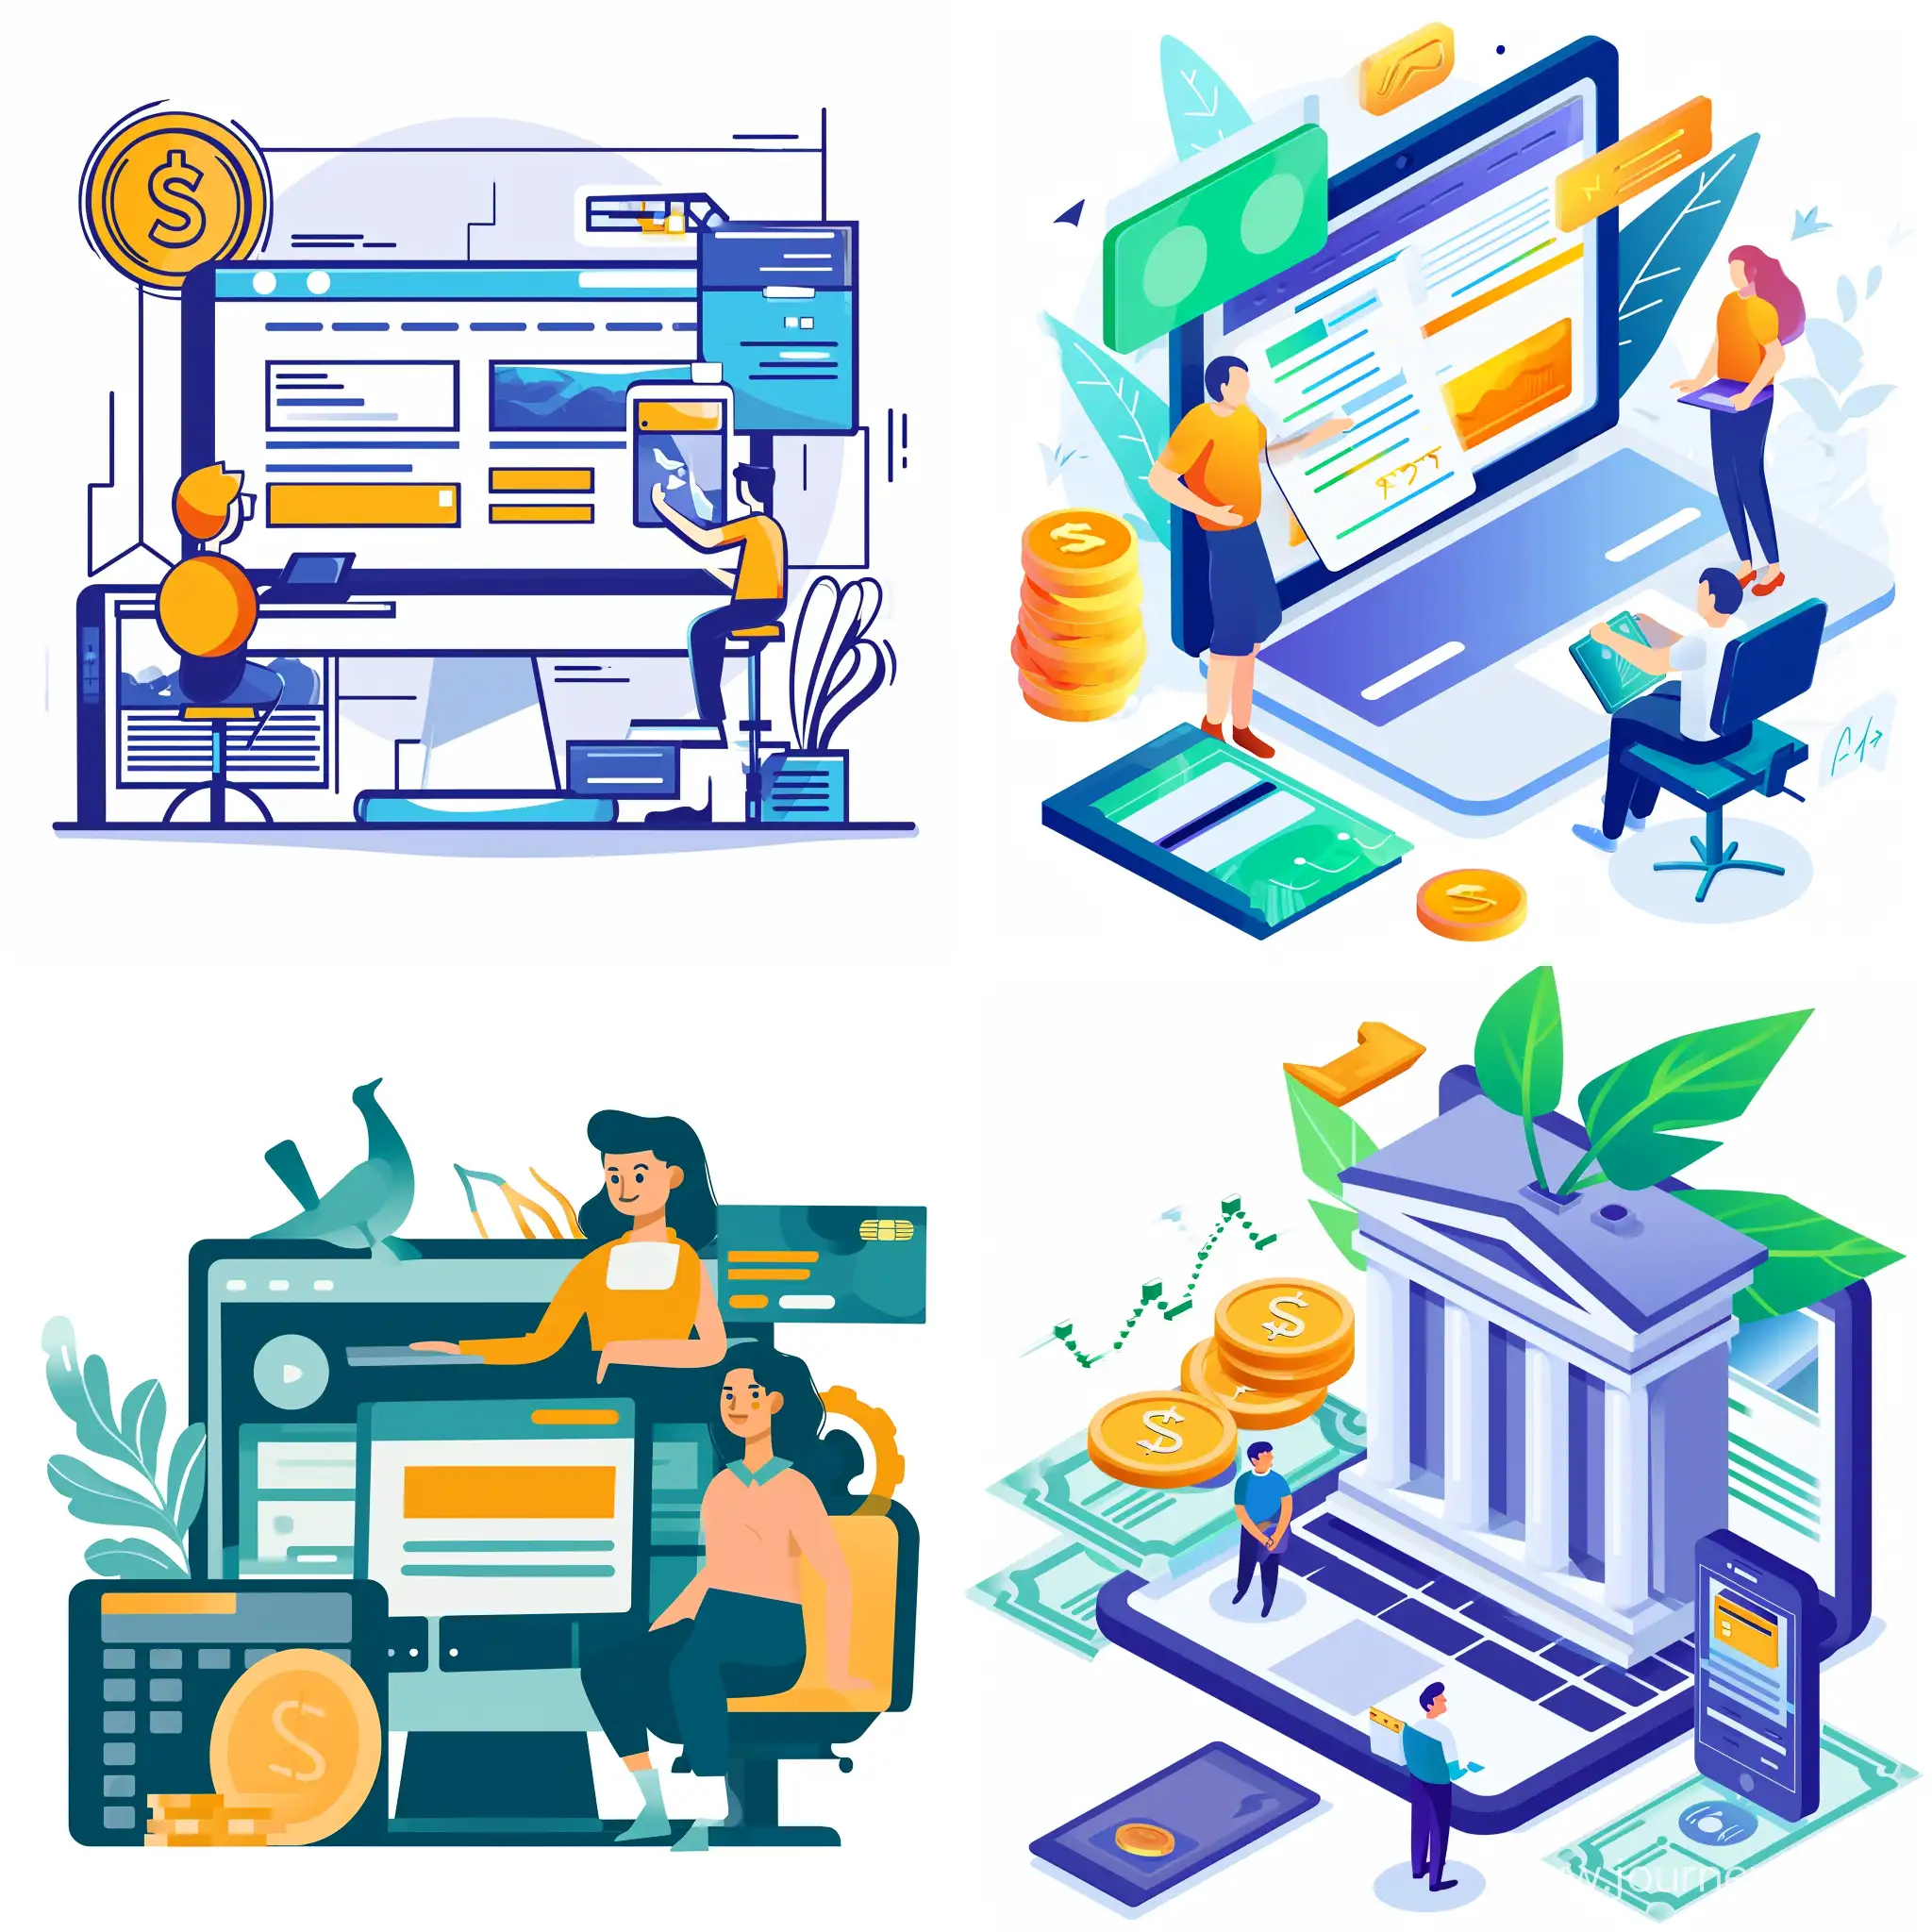 Website Illustration, Description "Your client can be a legal entity or an individual, and payment can be made from a corporate account or bank card. Work with clients directly or withdraw funds from popular freelancing platforms."